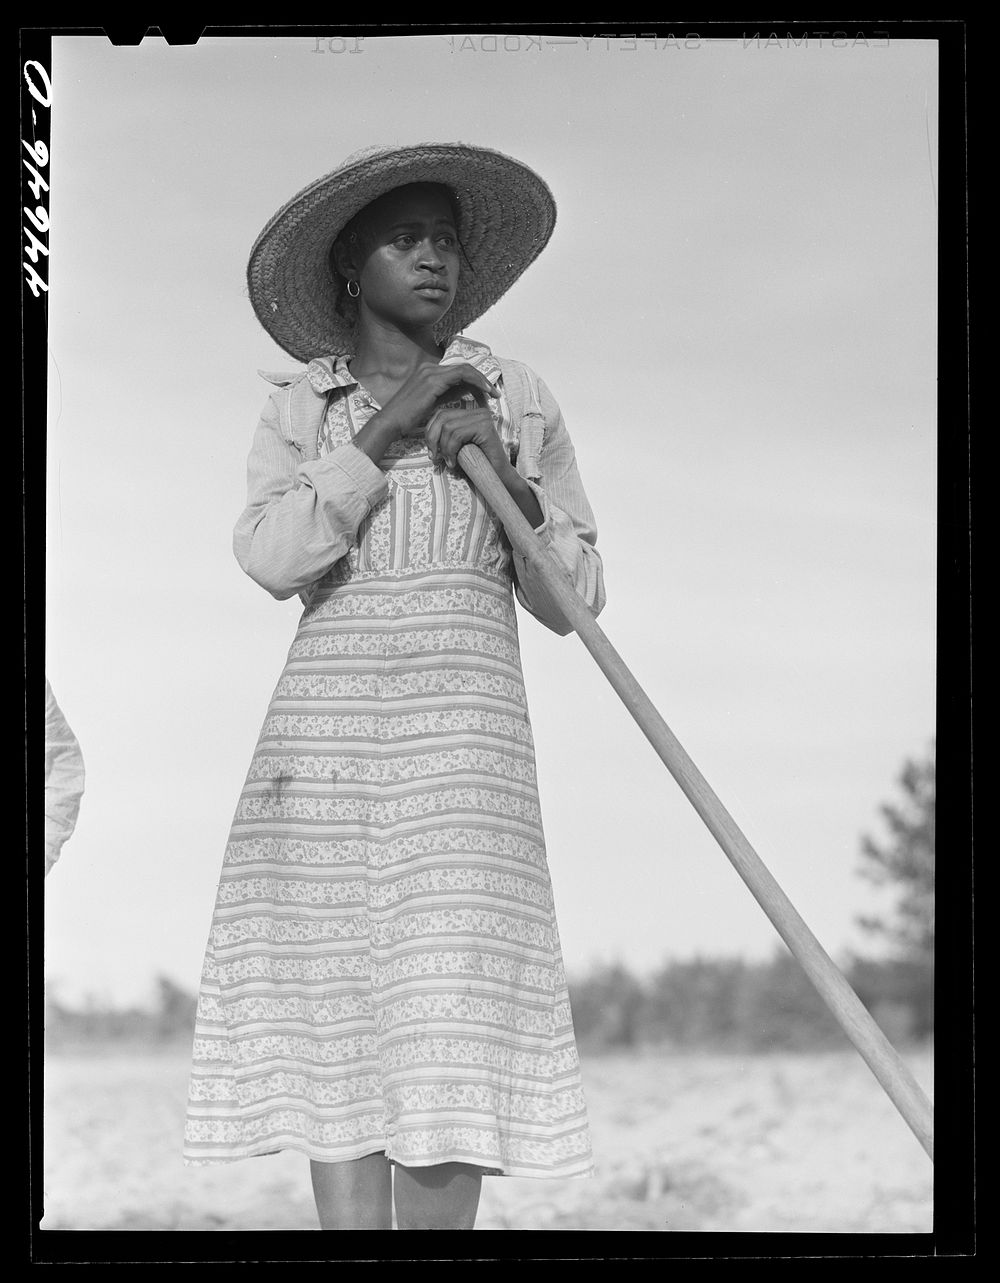 Mrs. LeRoy Dunn chopping cotton in a field near White Plains. Greene County, Georgia. Sourced from the Library of Congress.